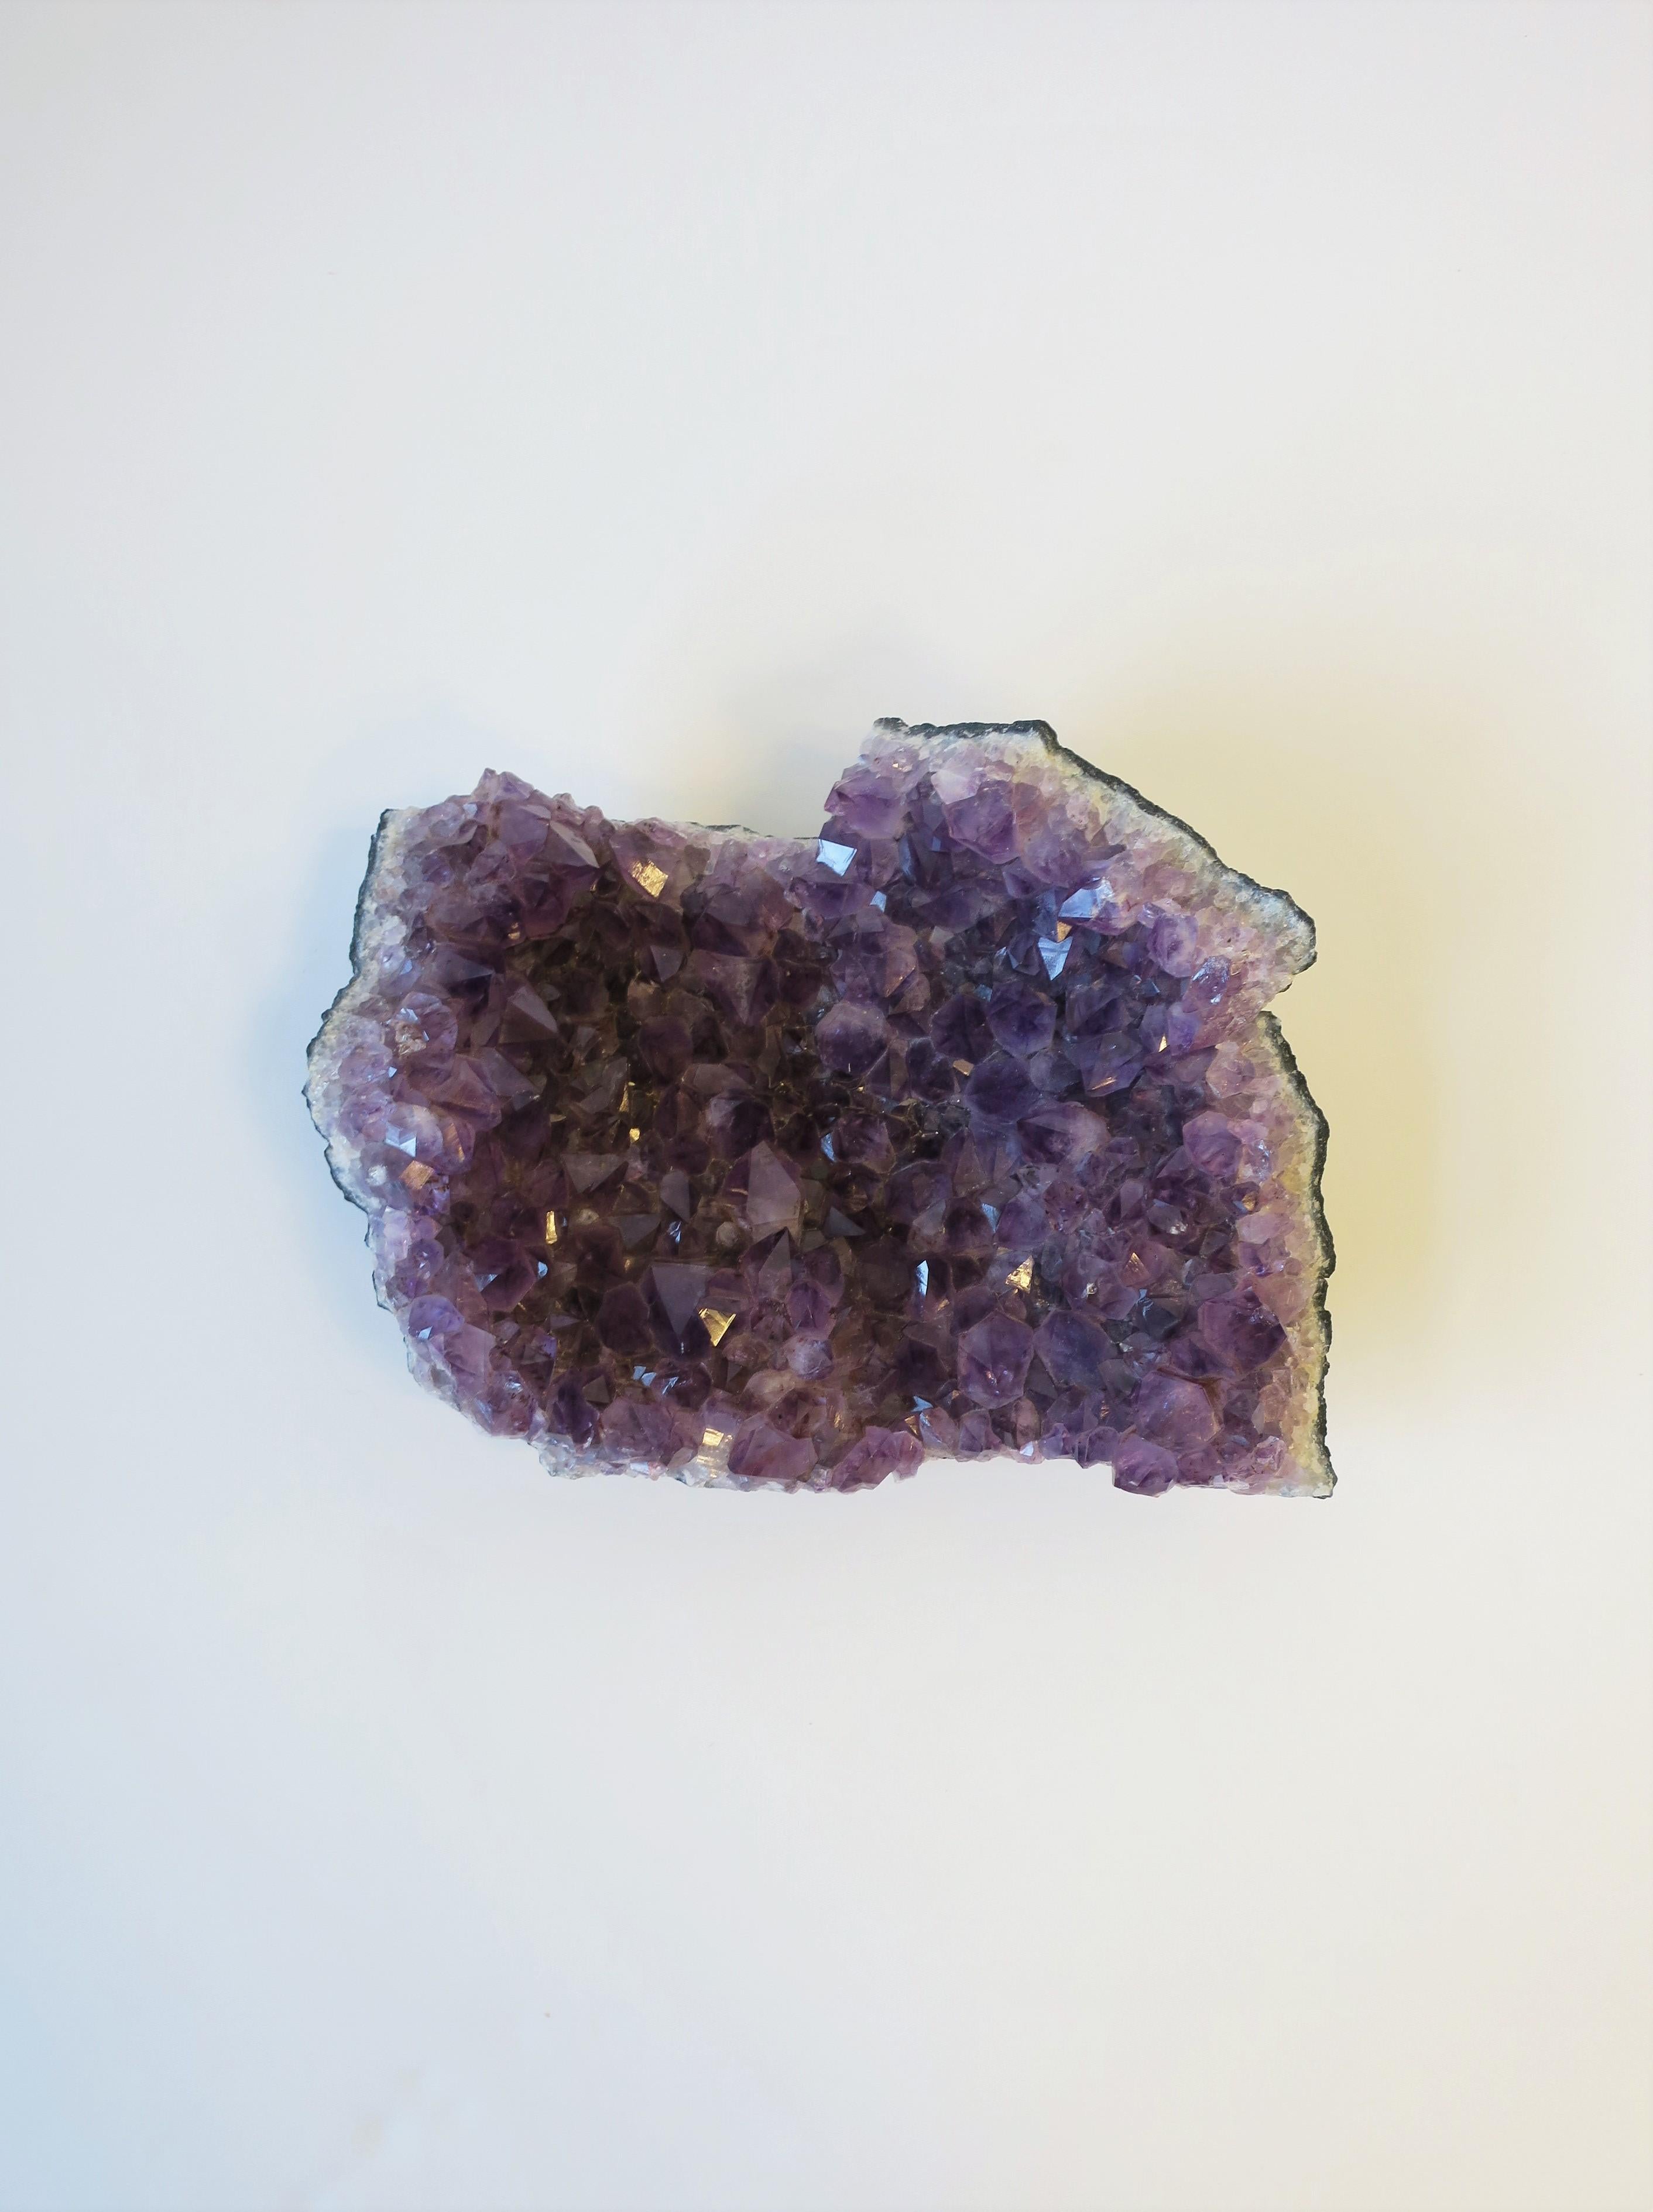 A beautiful and substantial purple amethyst natural specimen piece. A beautiful decorative object with a rich purple hue. Dimensions: 9